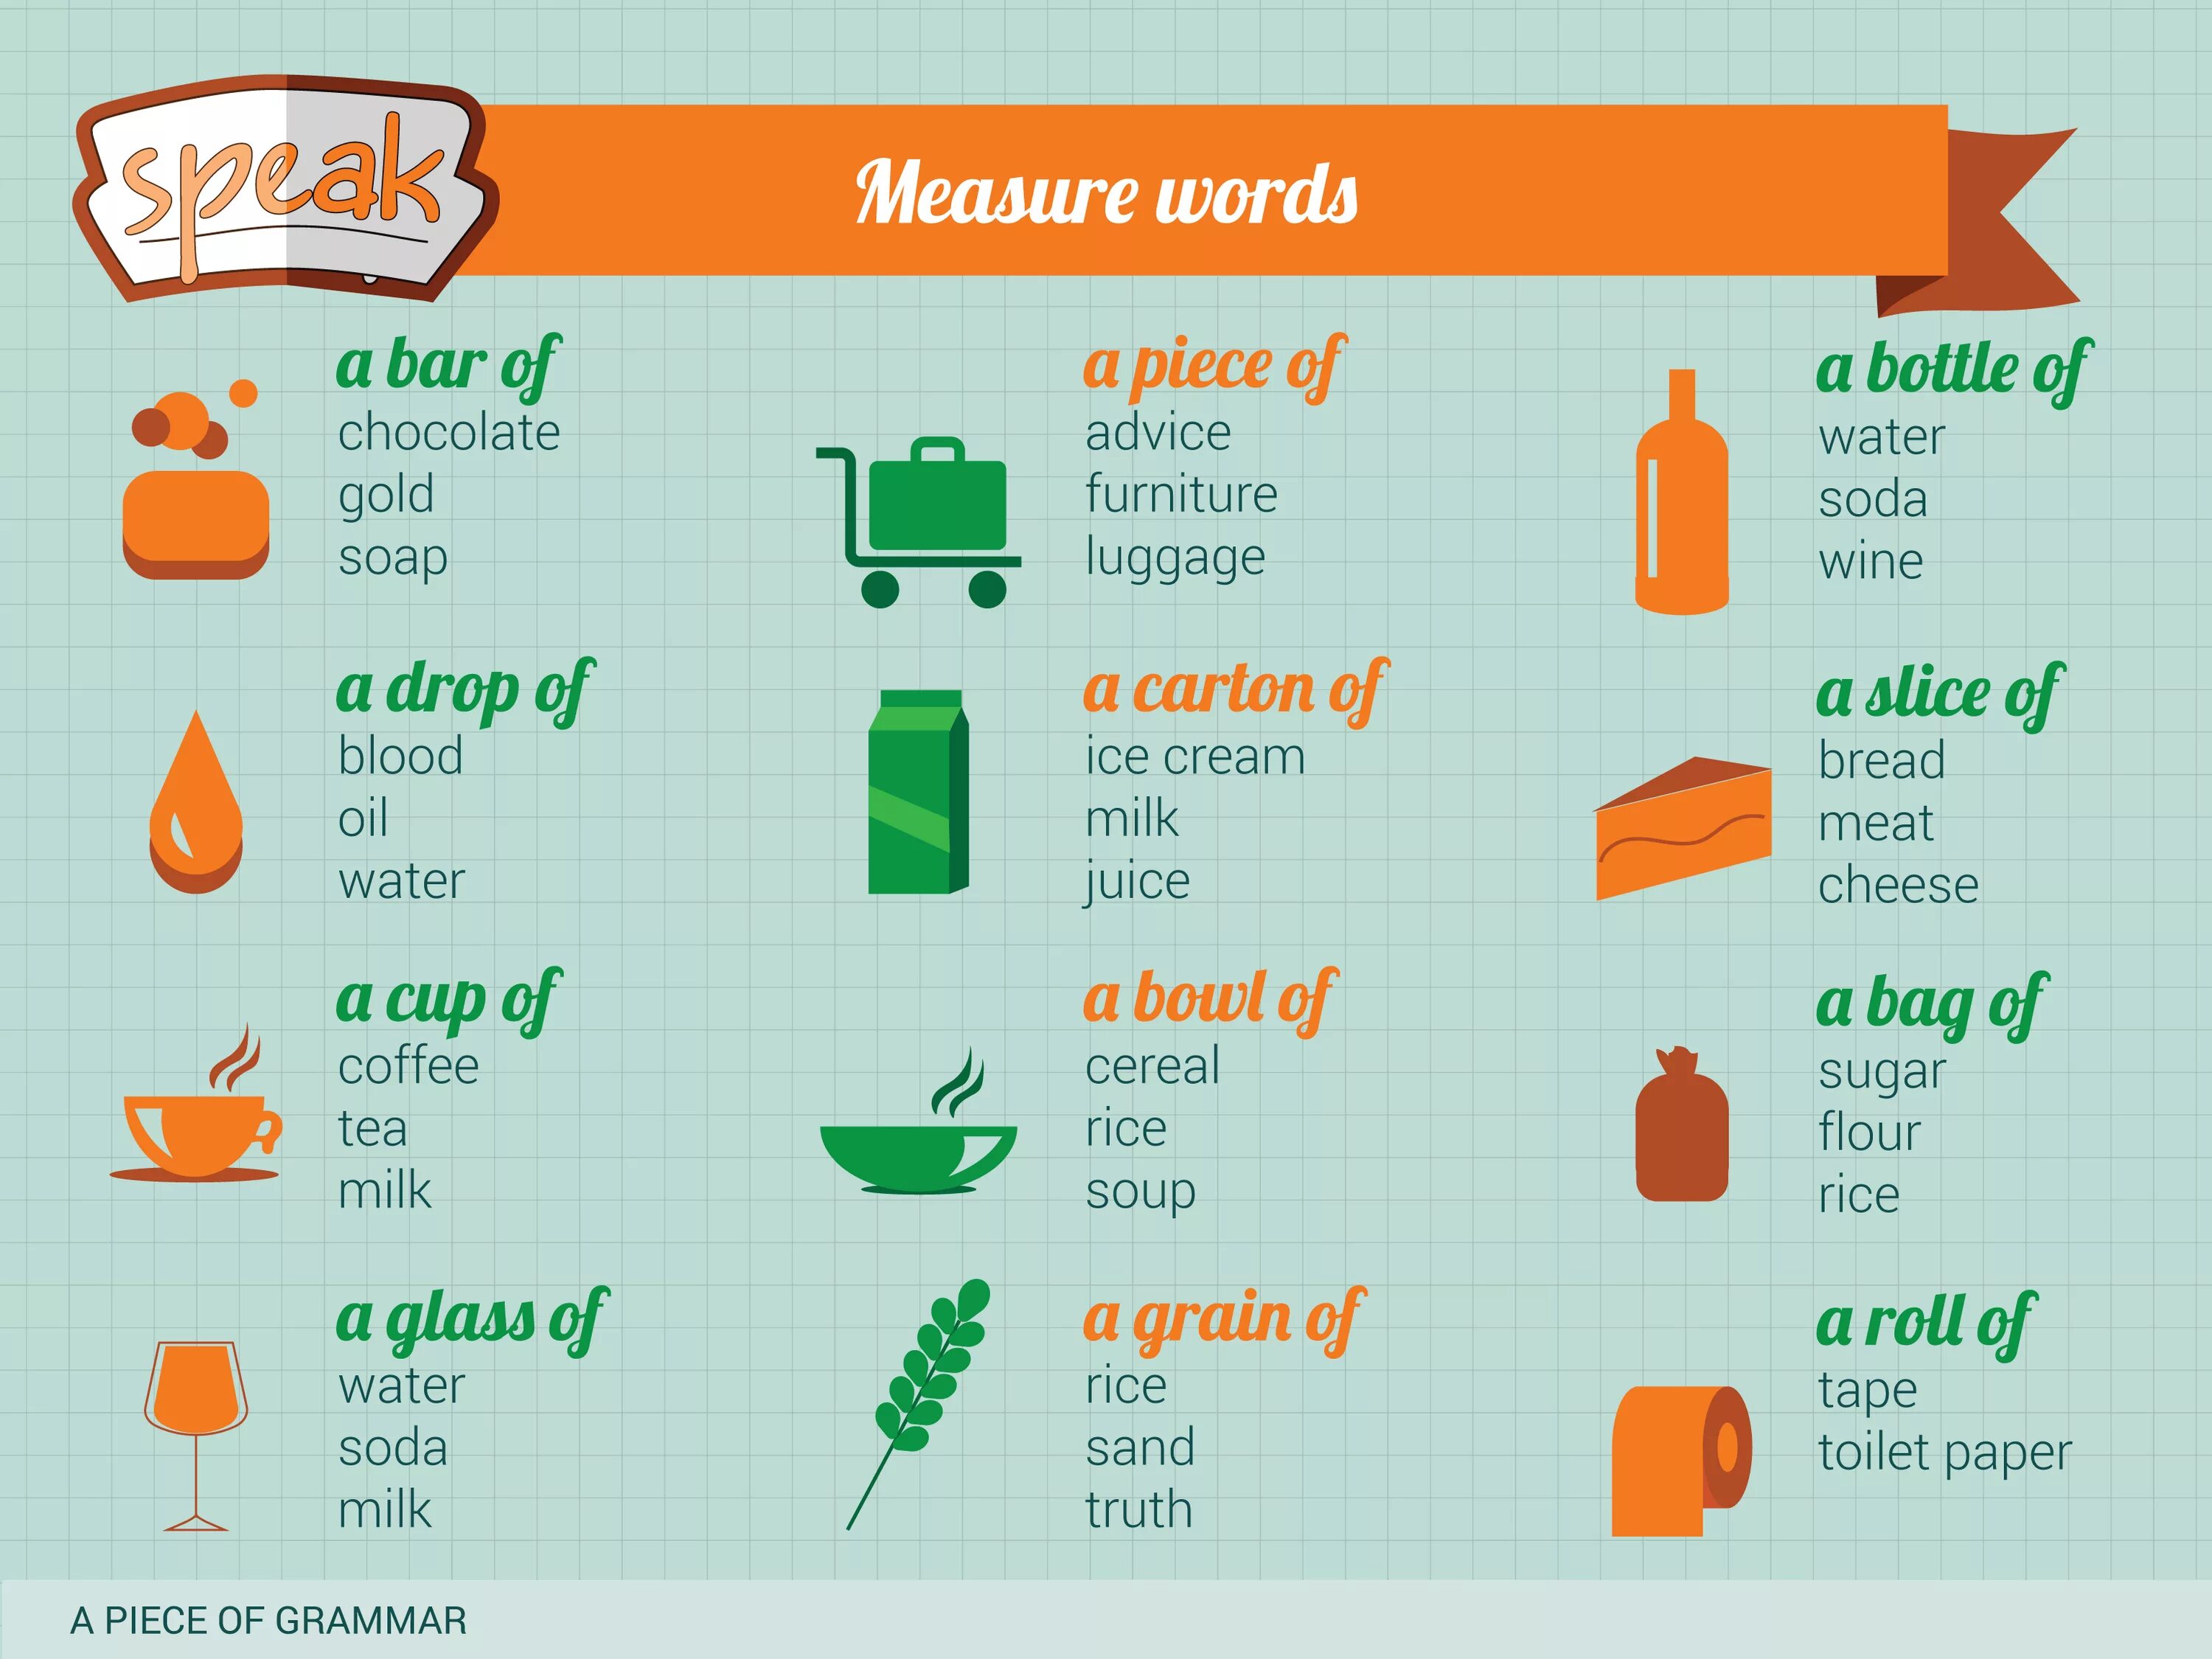 Uncountable Nouns. Countable and uncountable Nouns. Measure Words в английском. Countable and uncountable Nouns таблица. Package word